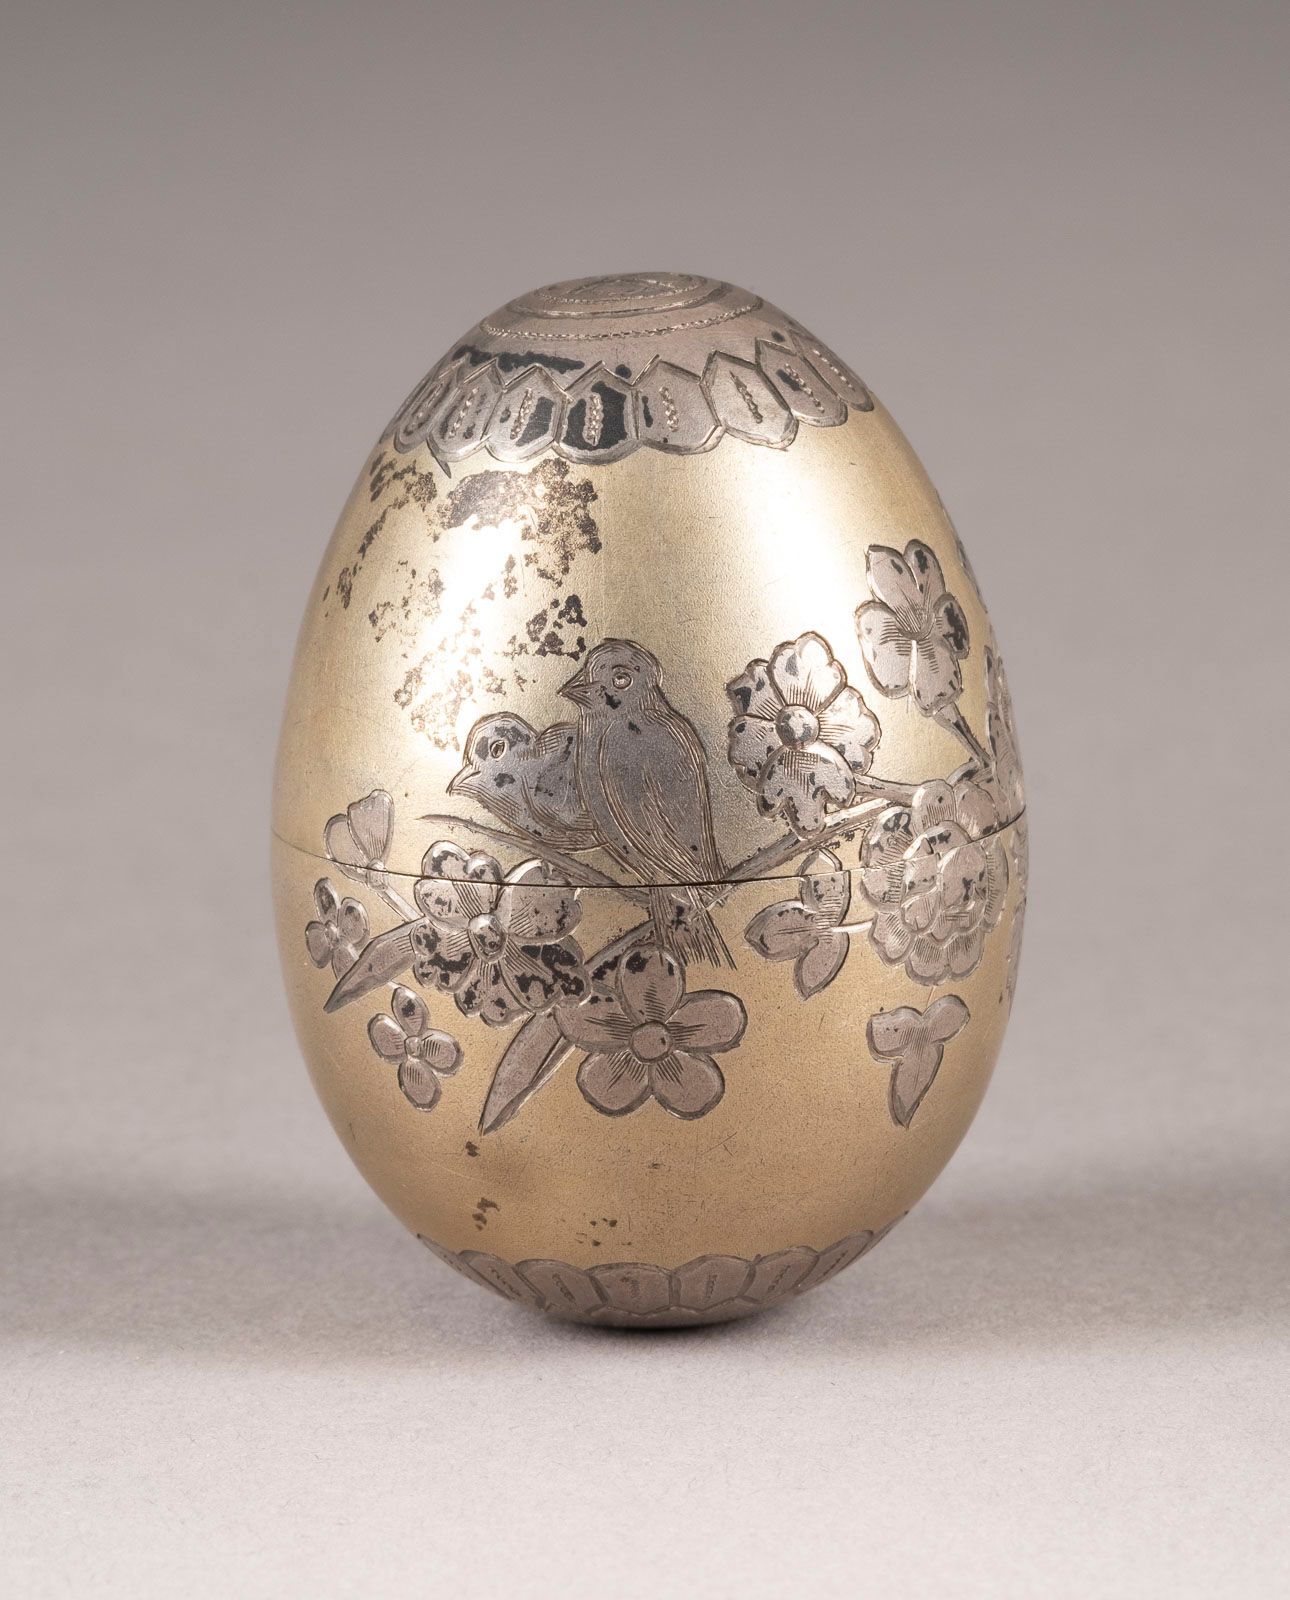 A SMALL EGG-SHAPED SILVER PARCEL-GILT BOX WITH FOLIAGE UNA PICCOLA SCATOLA D'ARG&hellip;